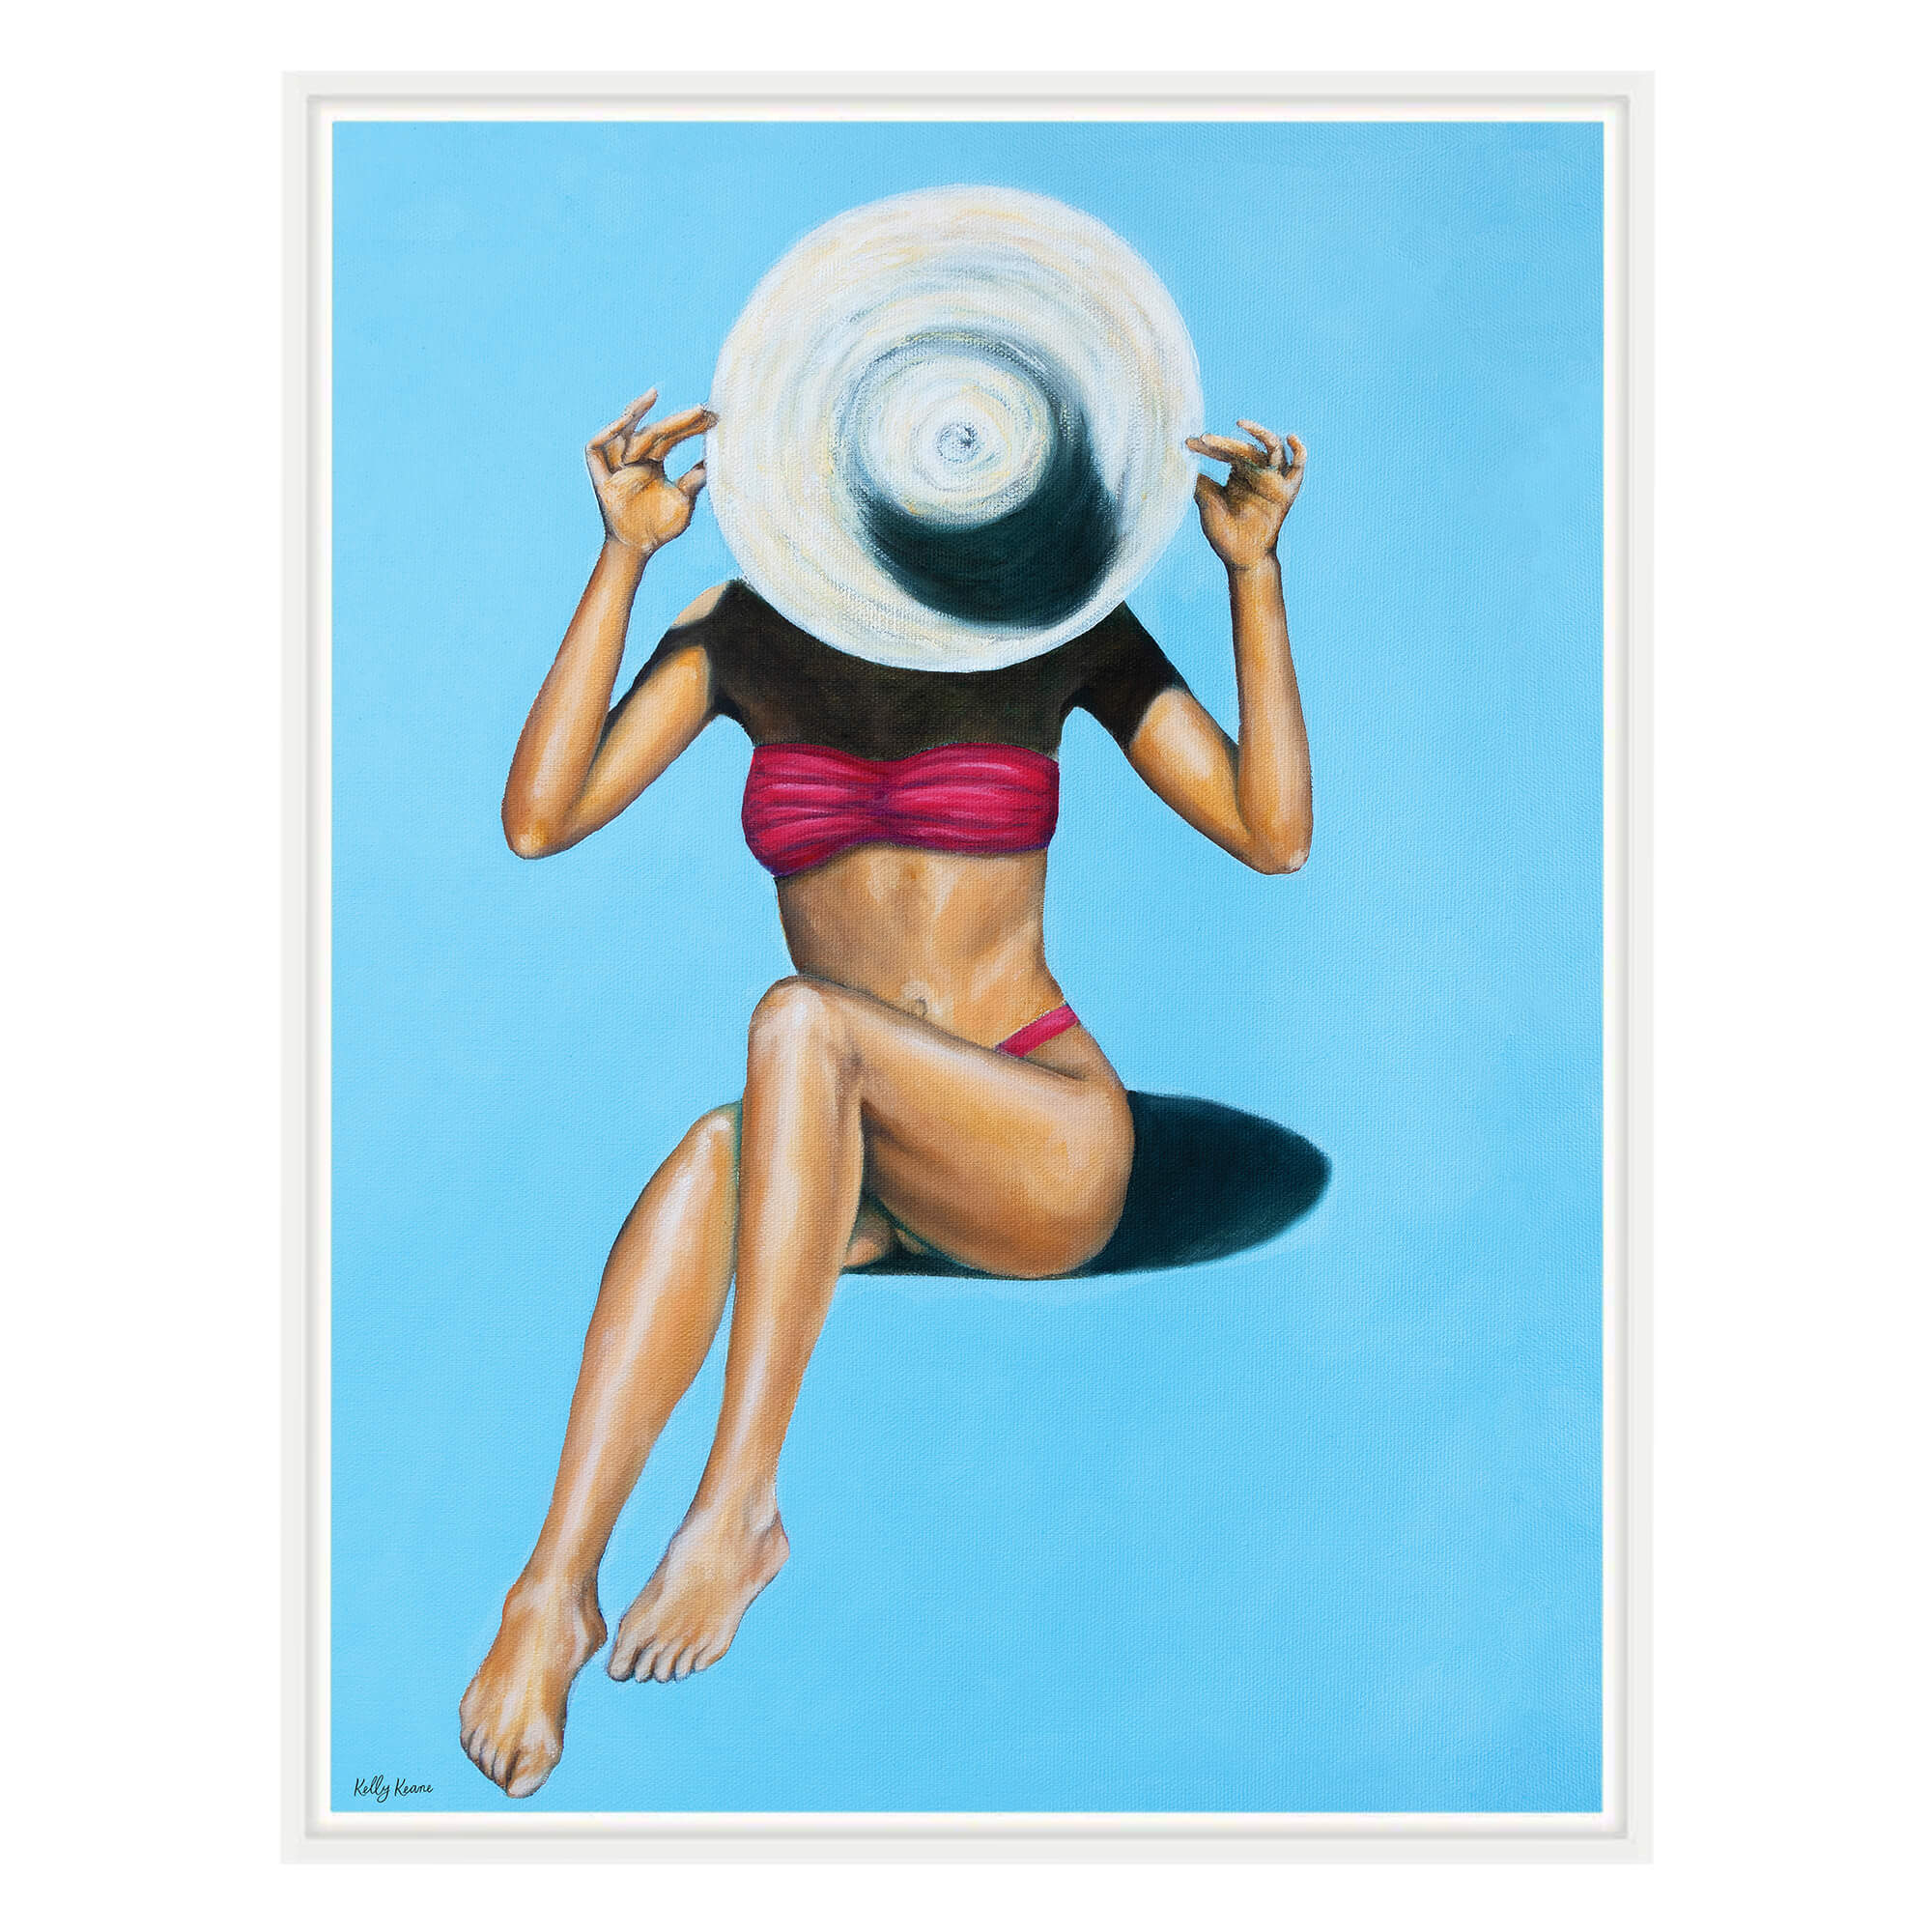 Canvas art print featuring a woman covering her face with a white hat by Hawaii artist Kelly Keane